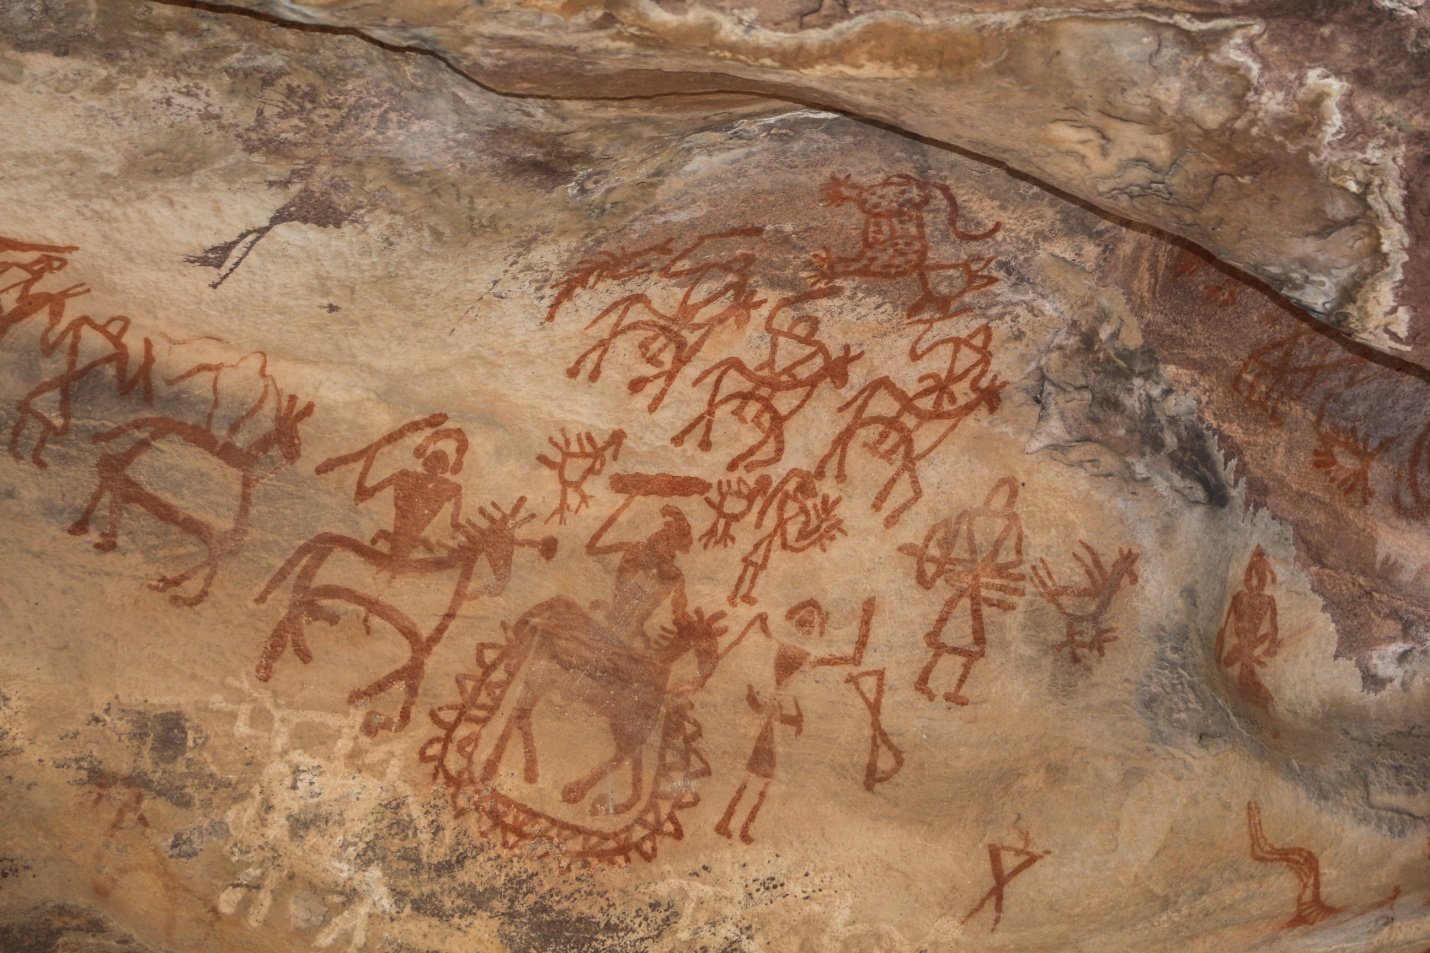 Picture of a rock painting located in Bhimbetka, India. The scene represents men on horseback or on foot returning from war or a group hunting.